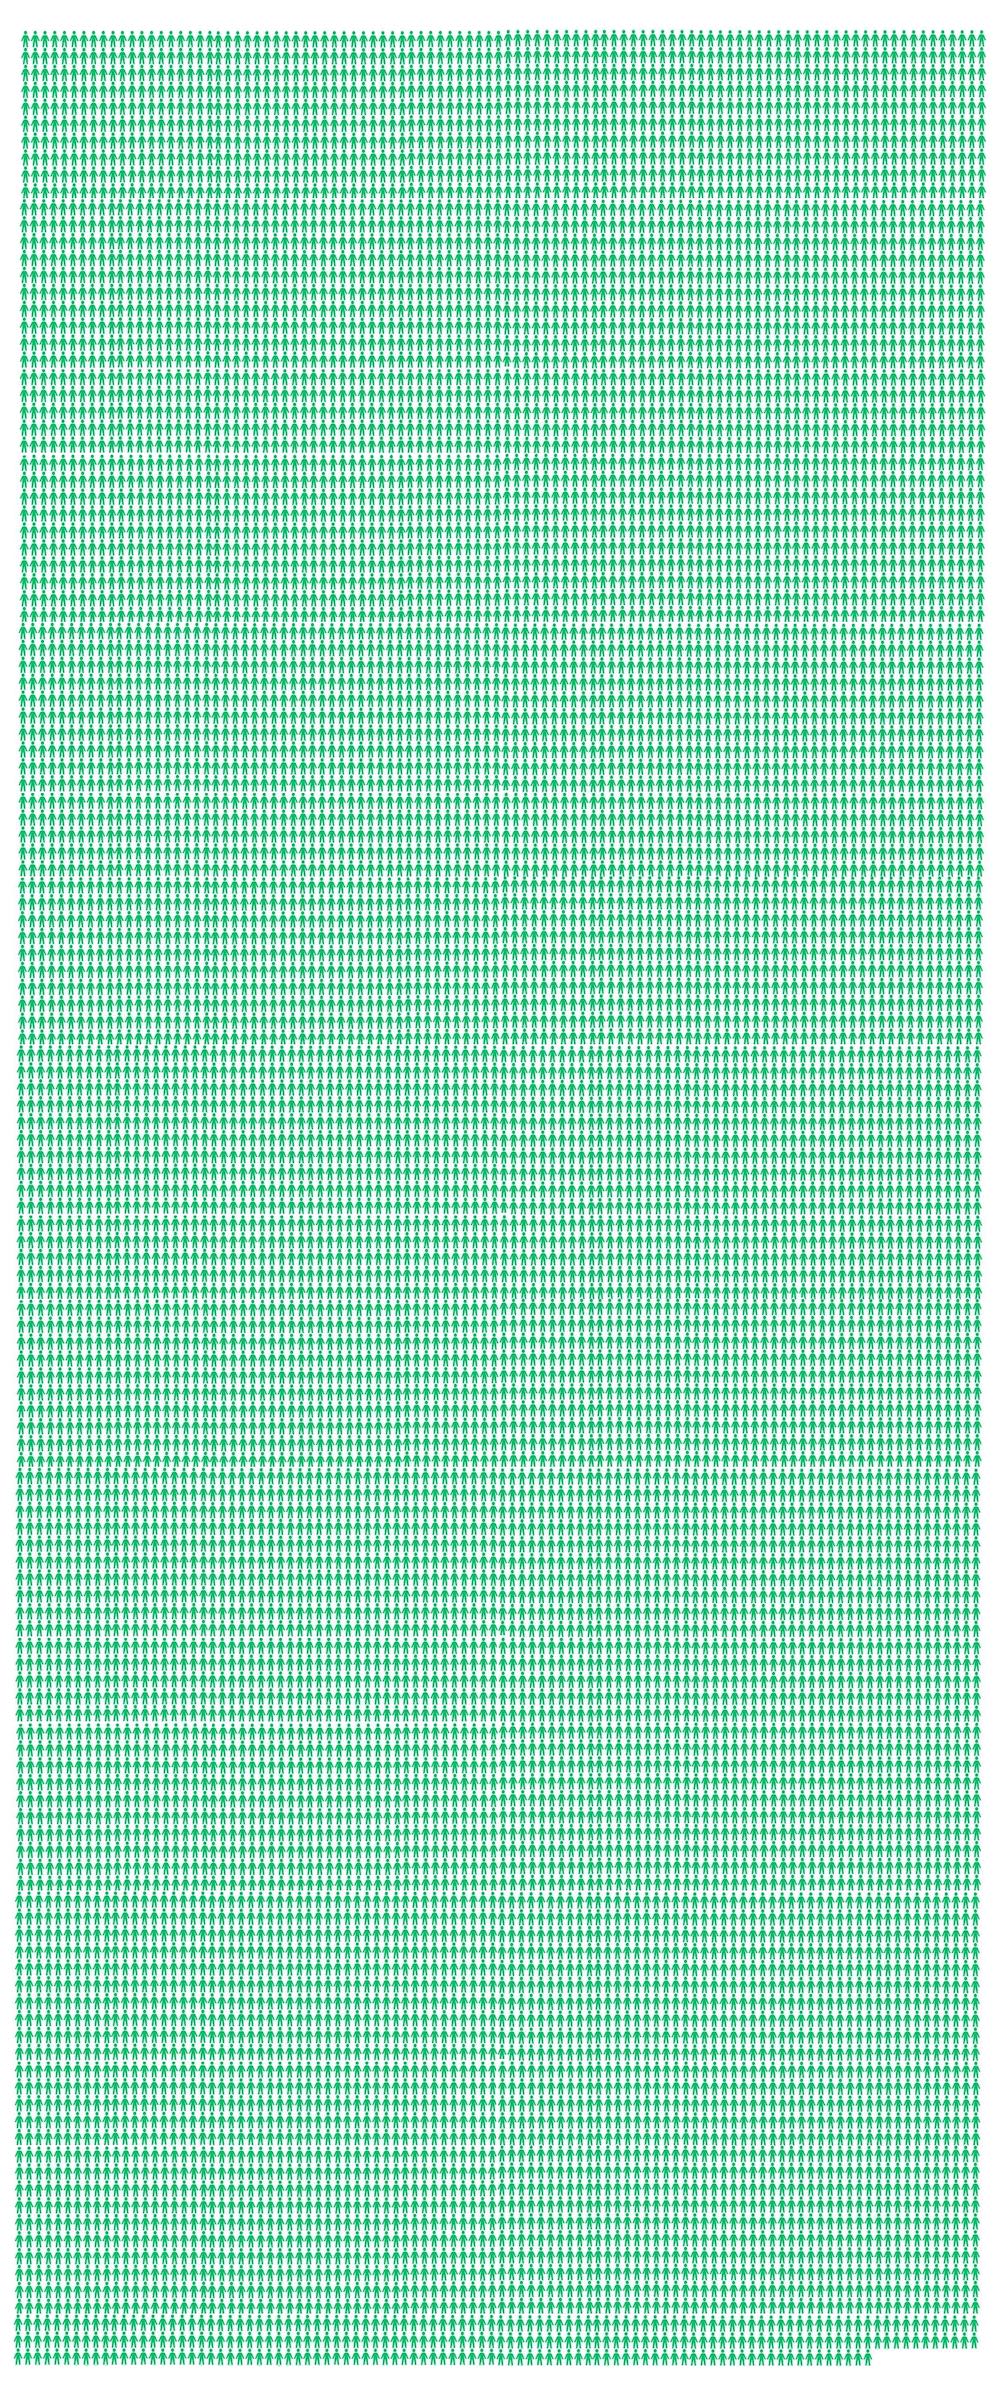 An illustration shows 13,789 figures, in green, each representing one person who died due to toxic drugs in B.C. since 2016.